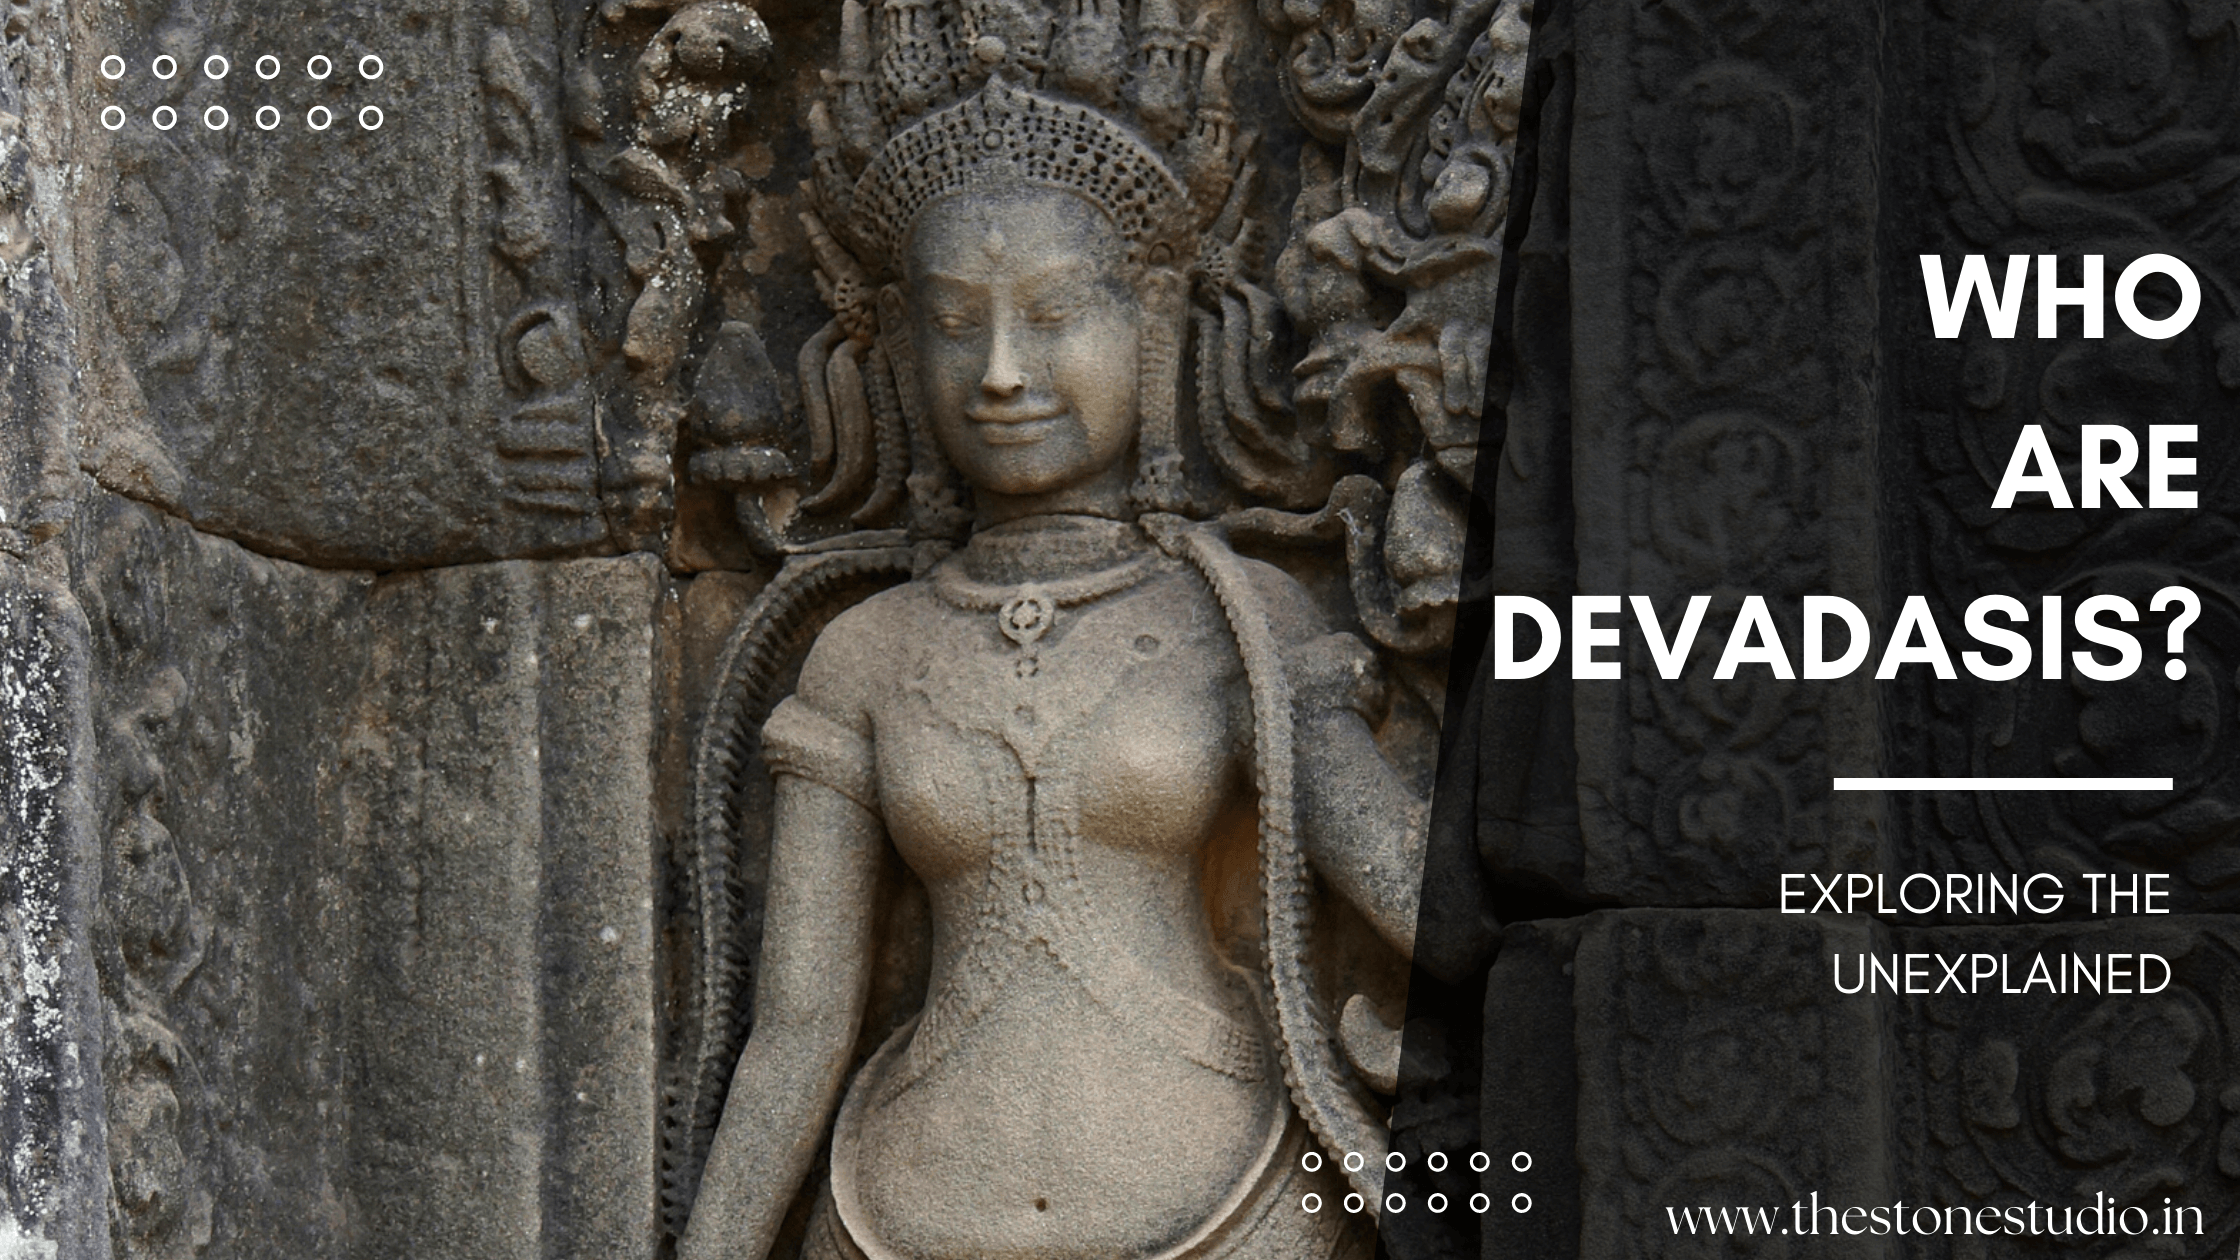 Who are Devadasis